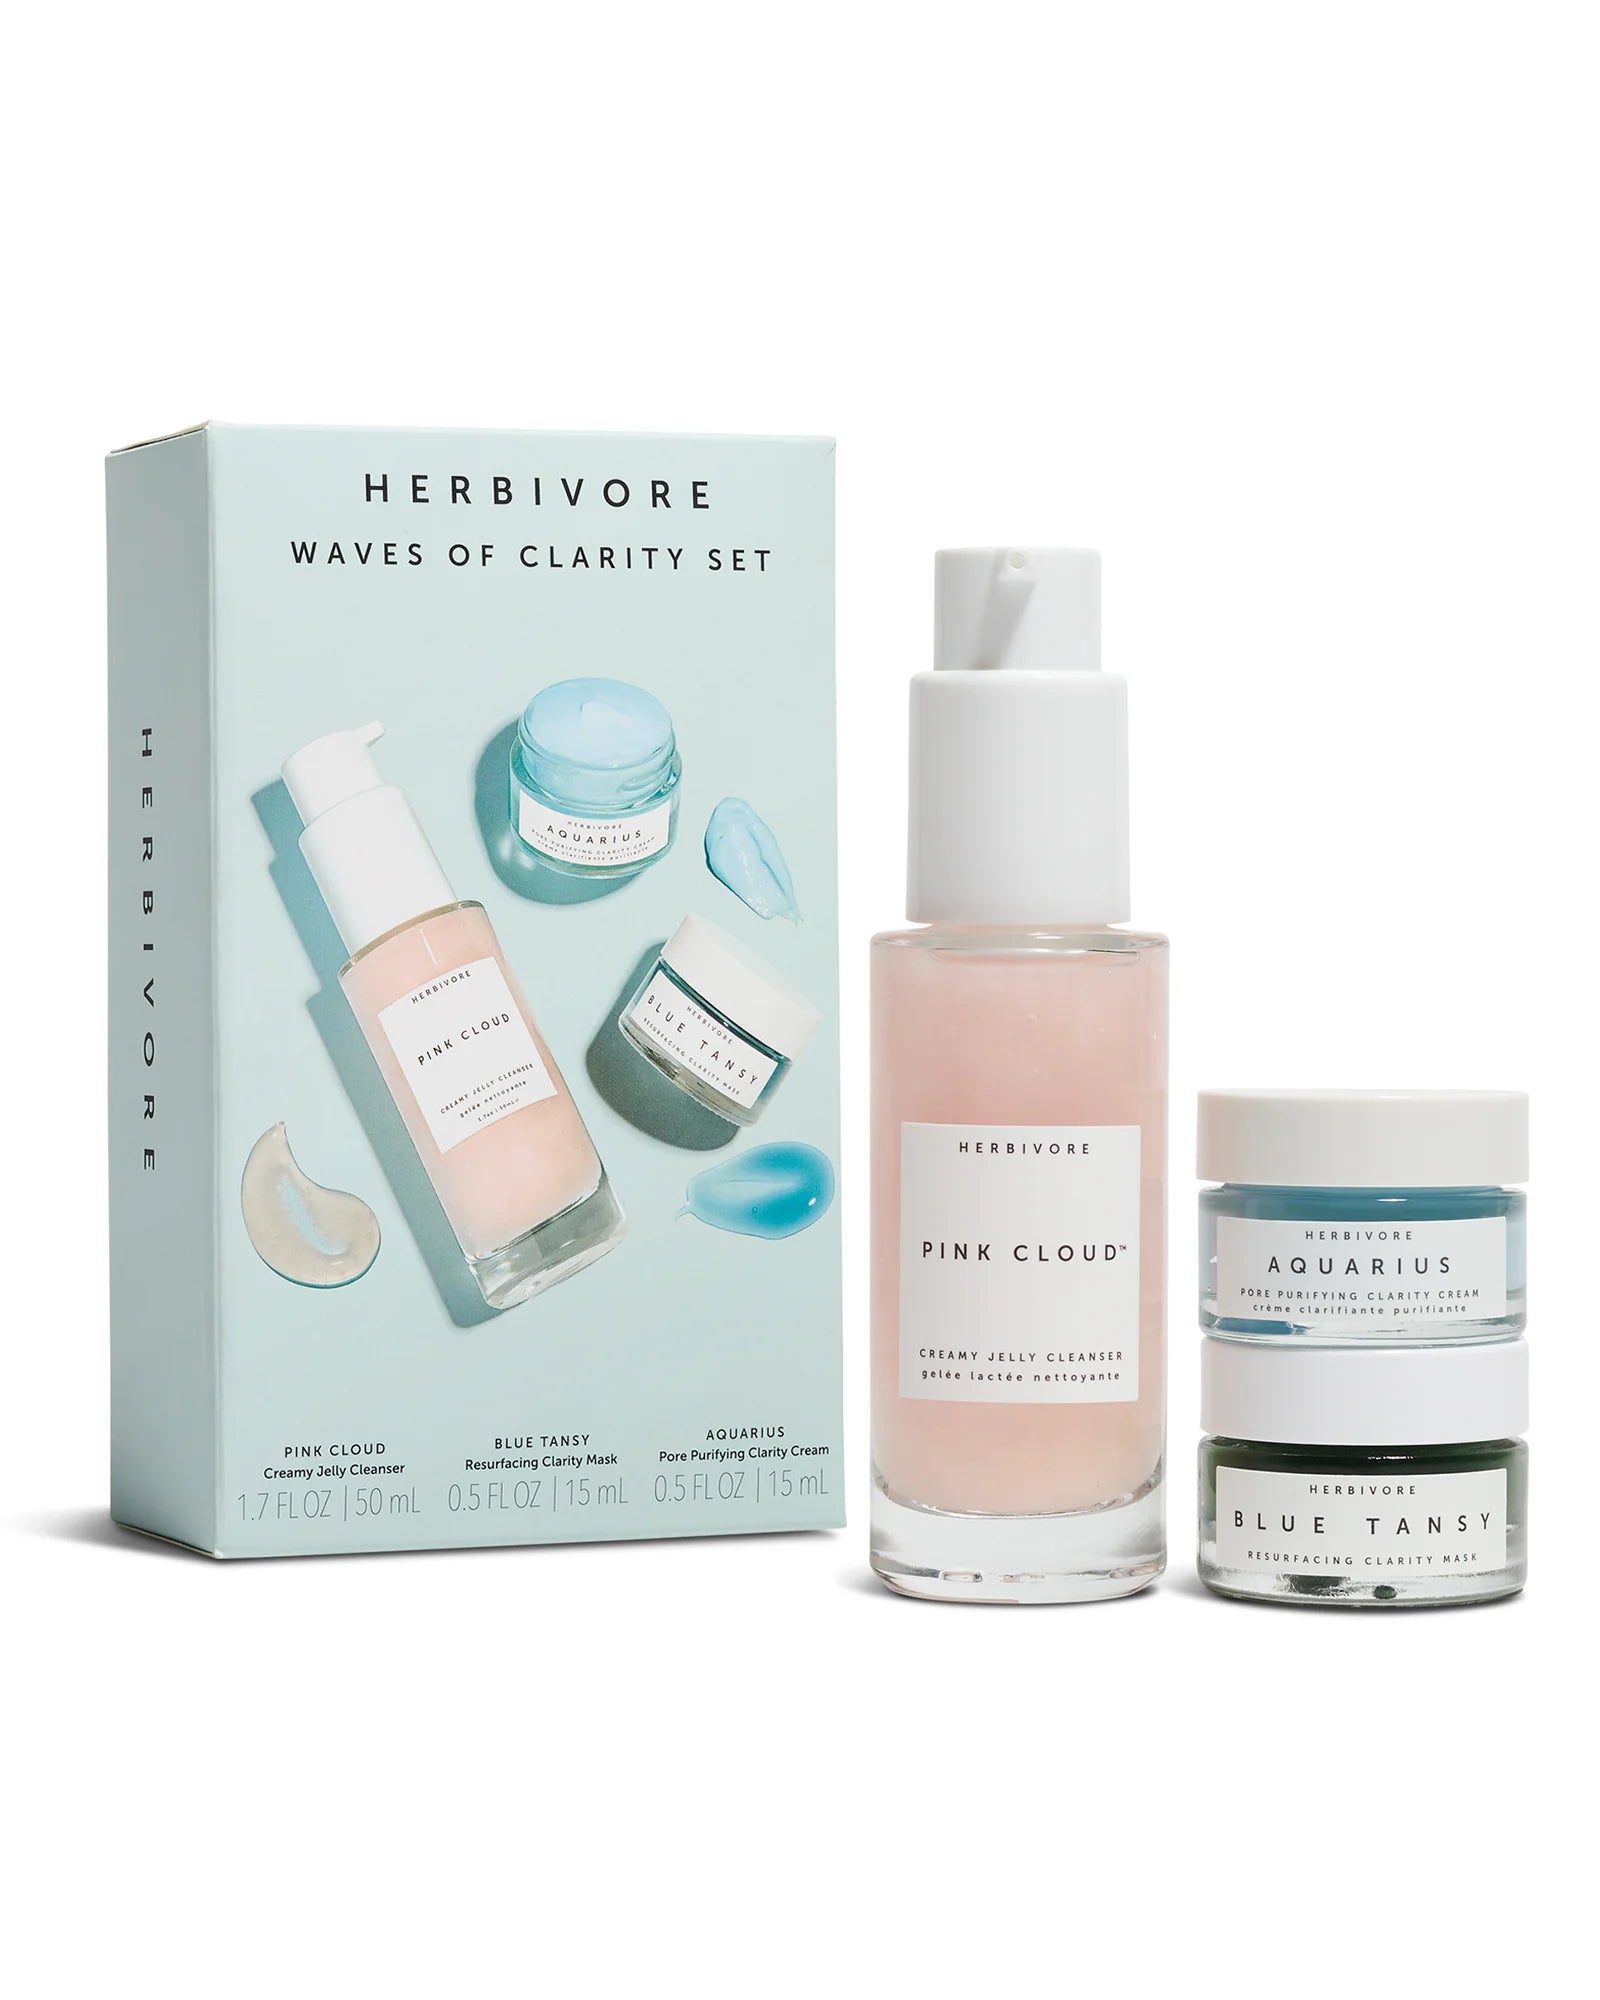 Herbivore Waves of Clarity Pore Purifying Set